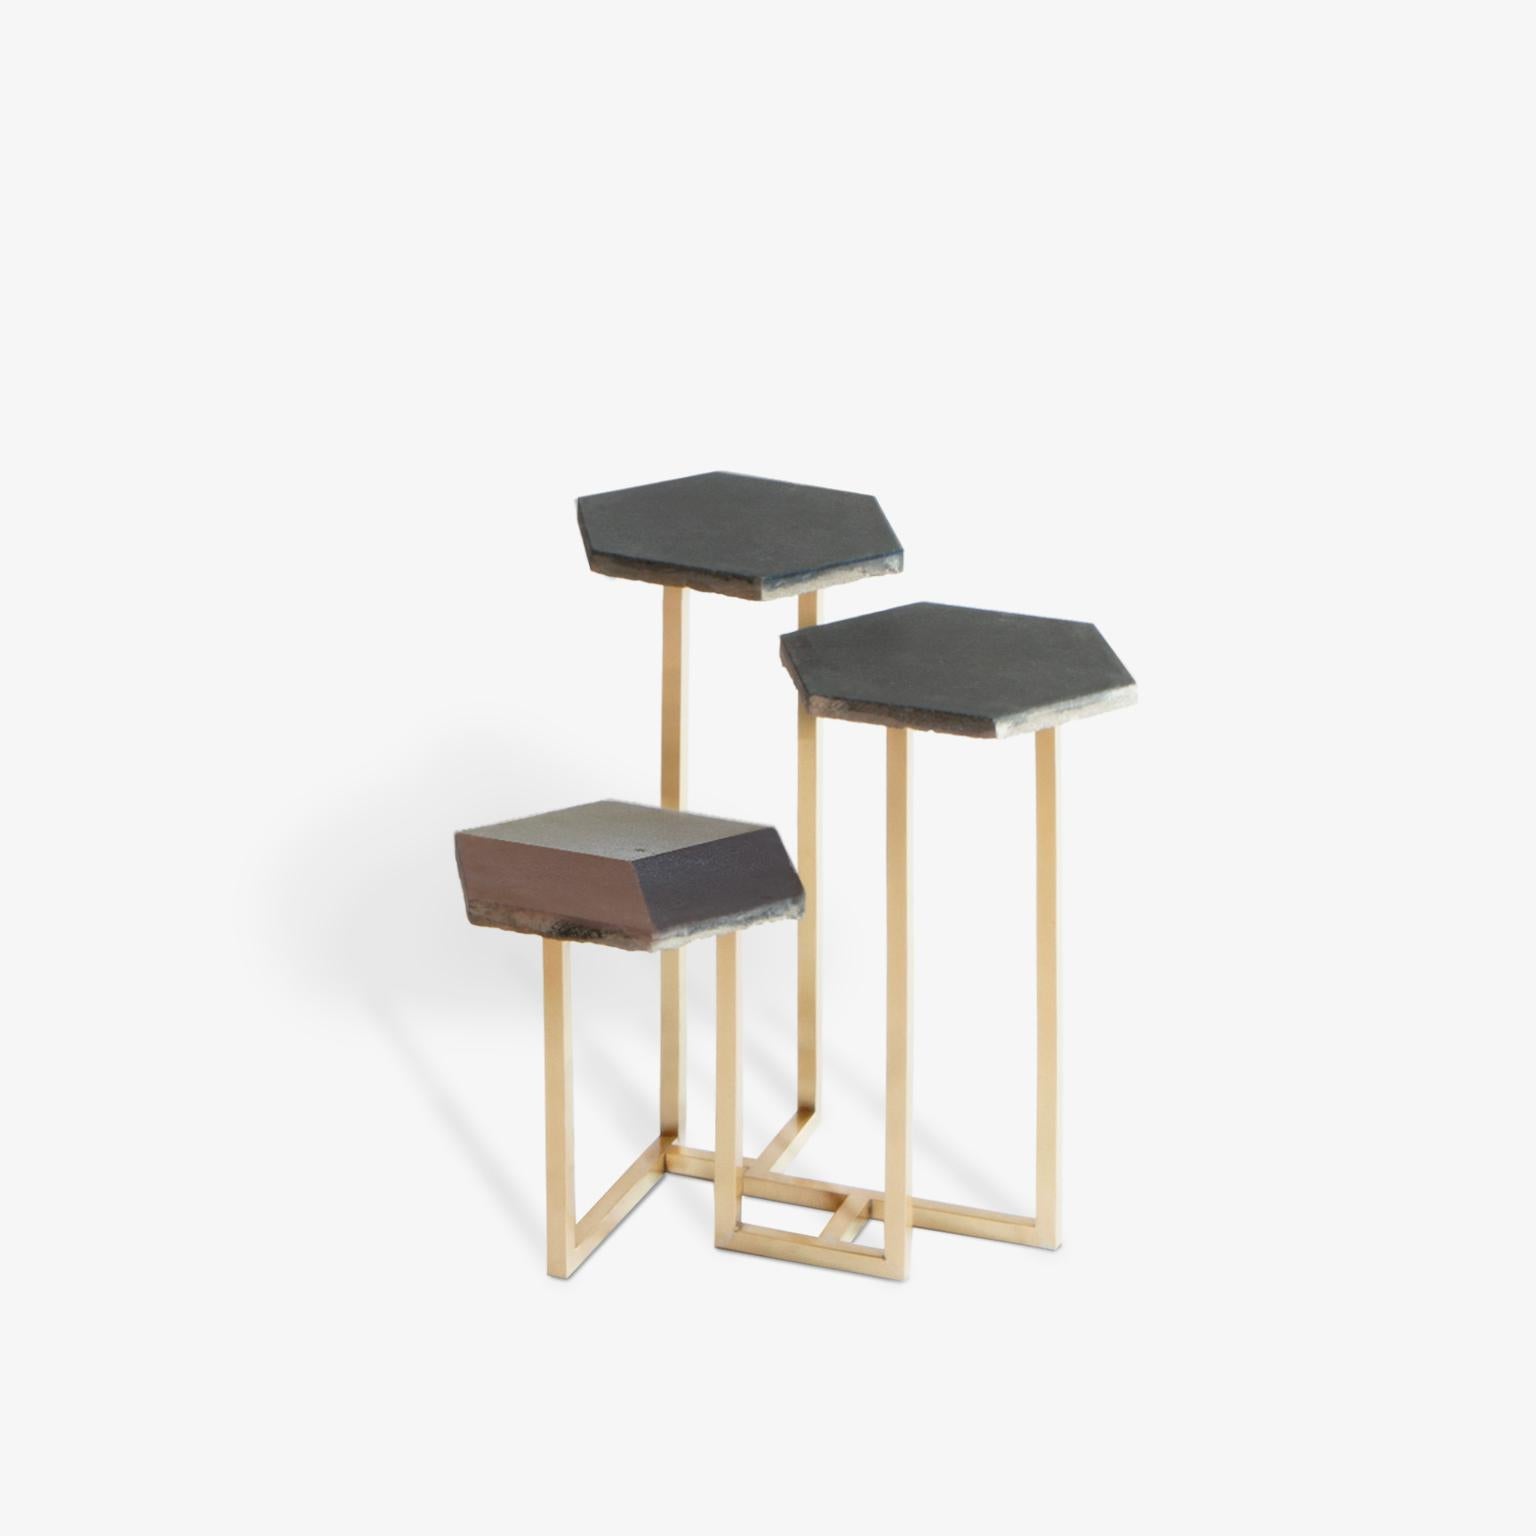 Italian 21st Century Petit Table de Milàn Side Table with Brass Base and Colored Tiles